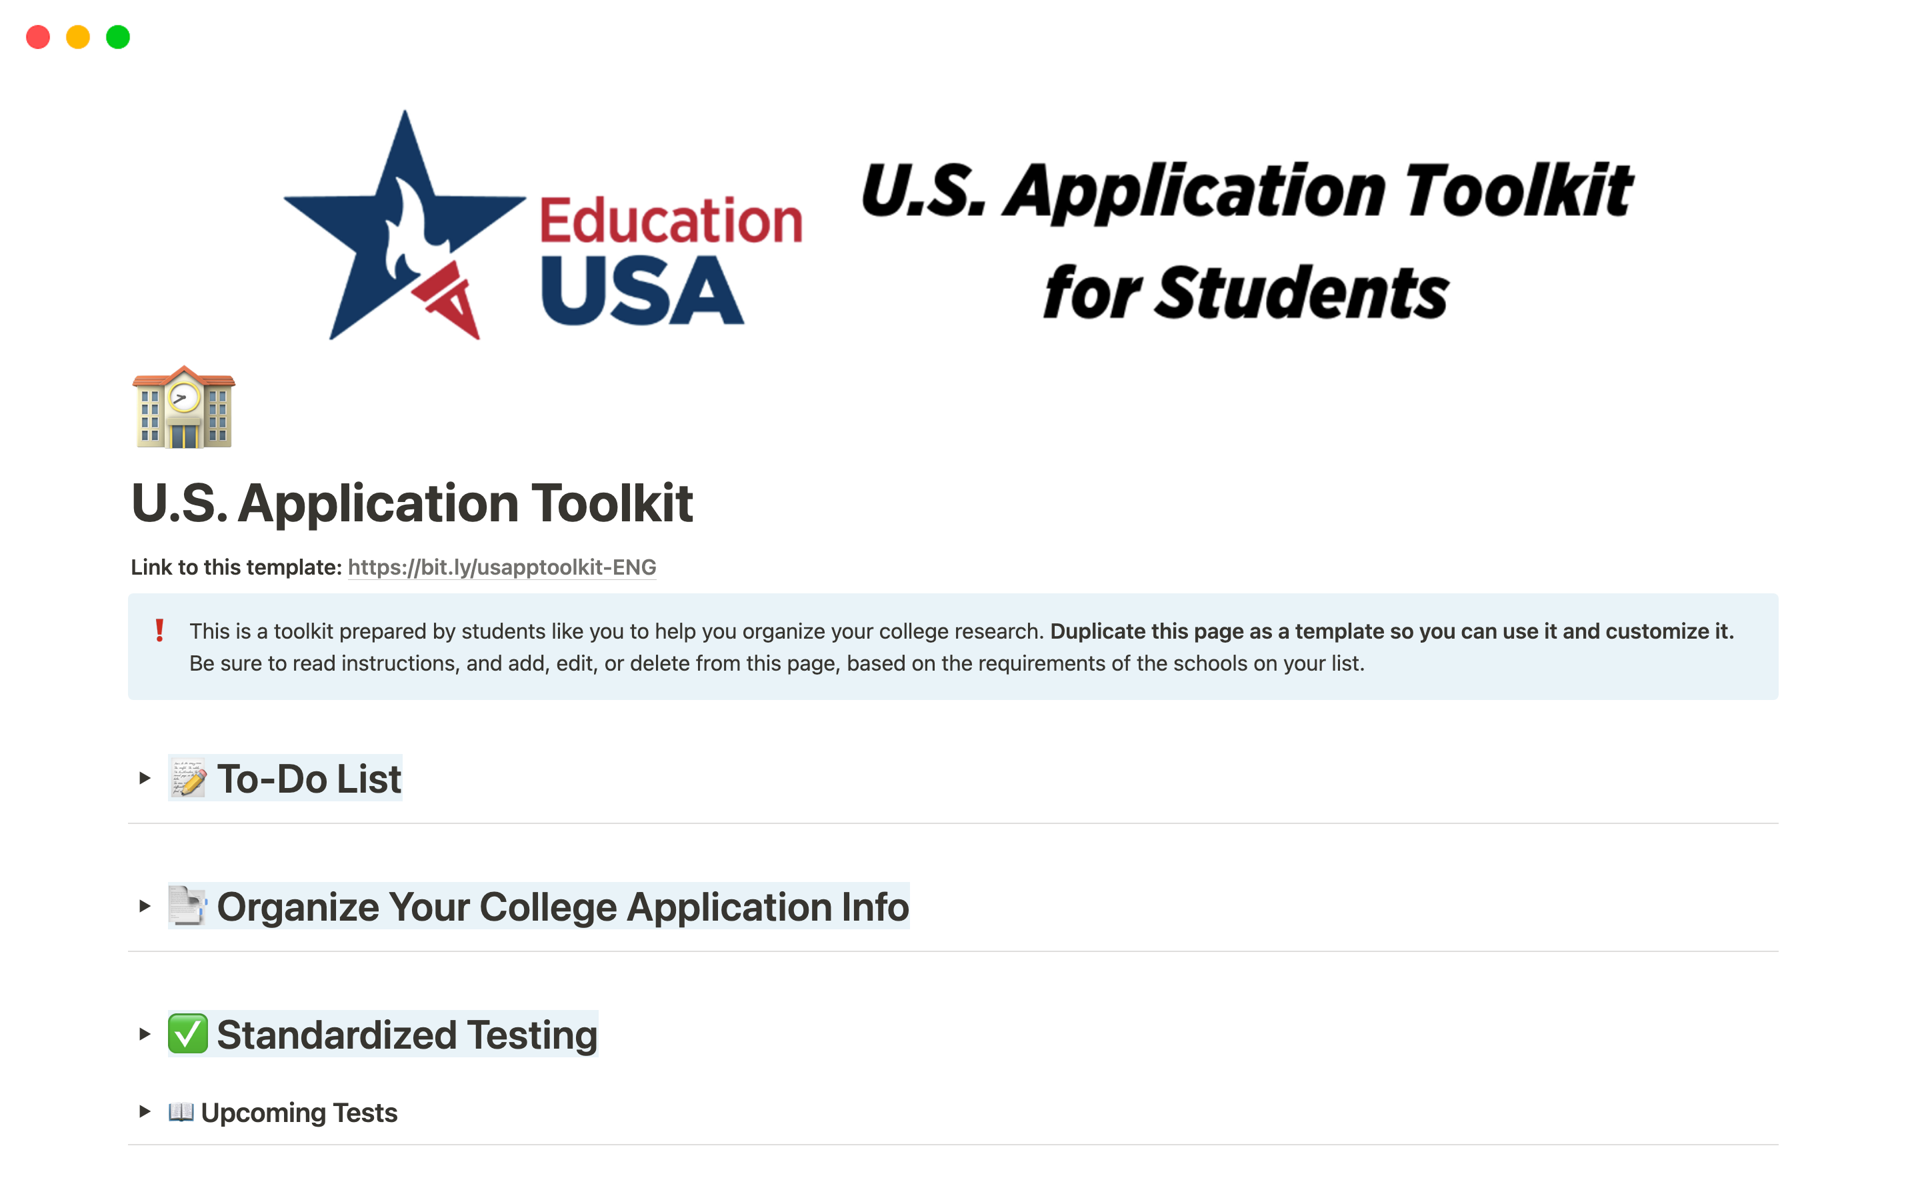 Organize your U.S. college and university applications with this resource from EducationUSA!